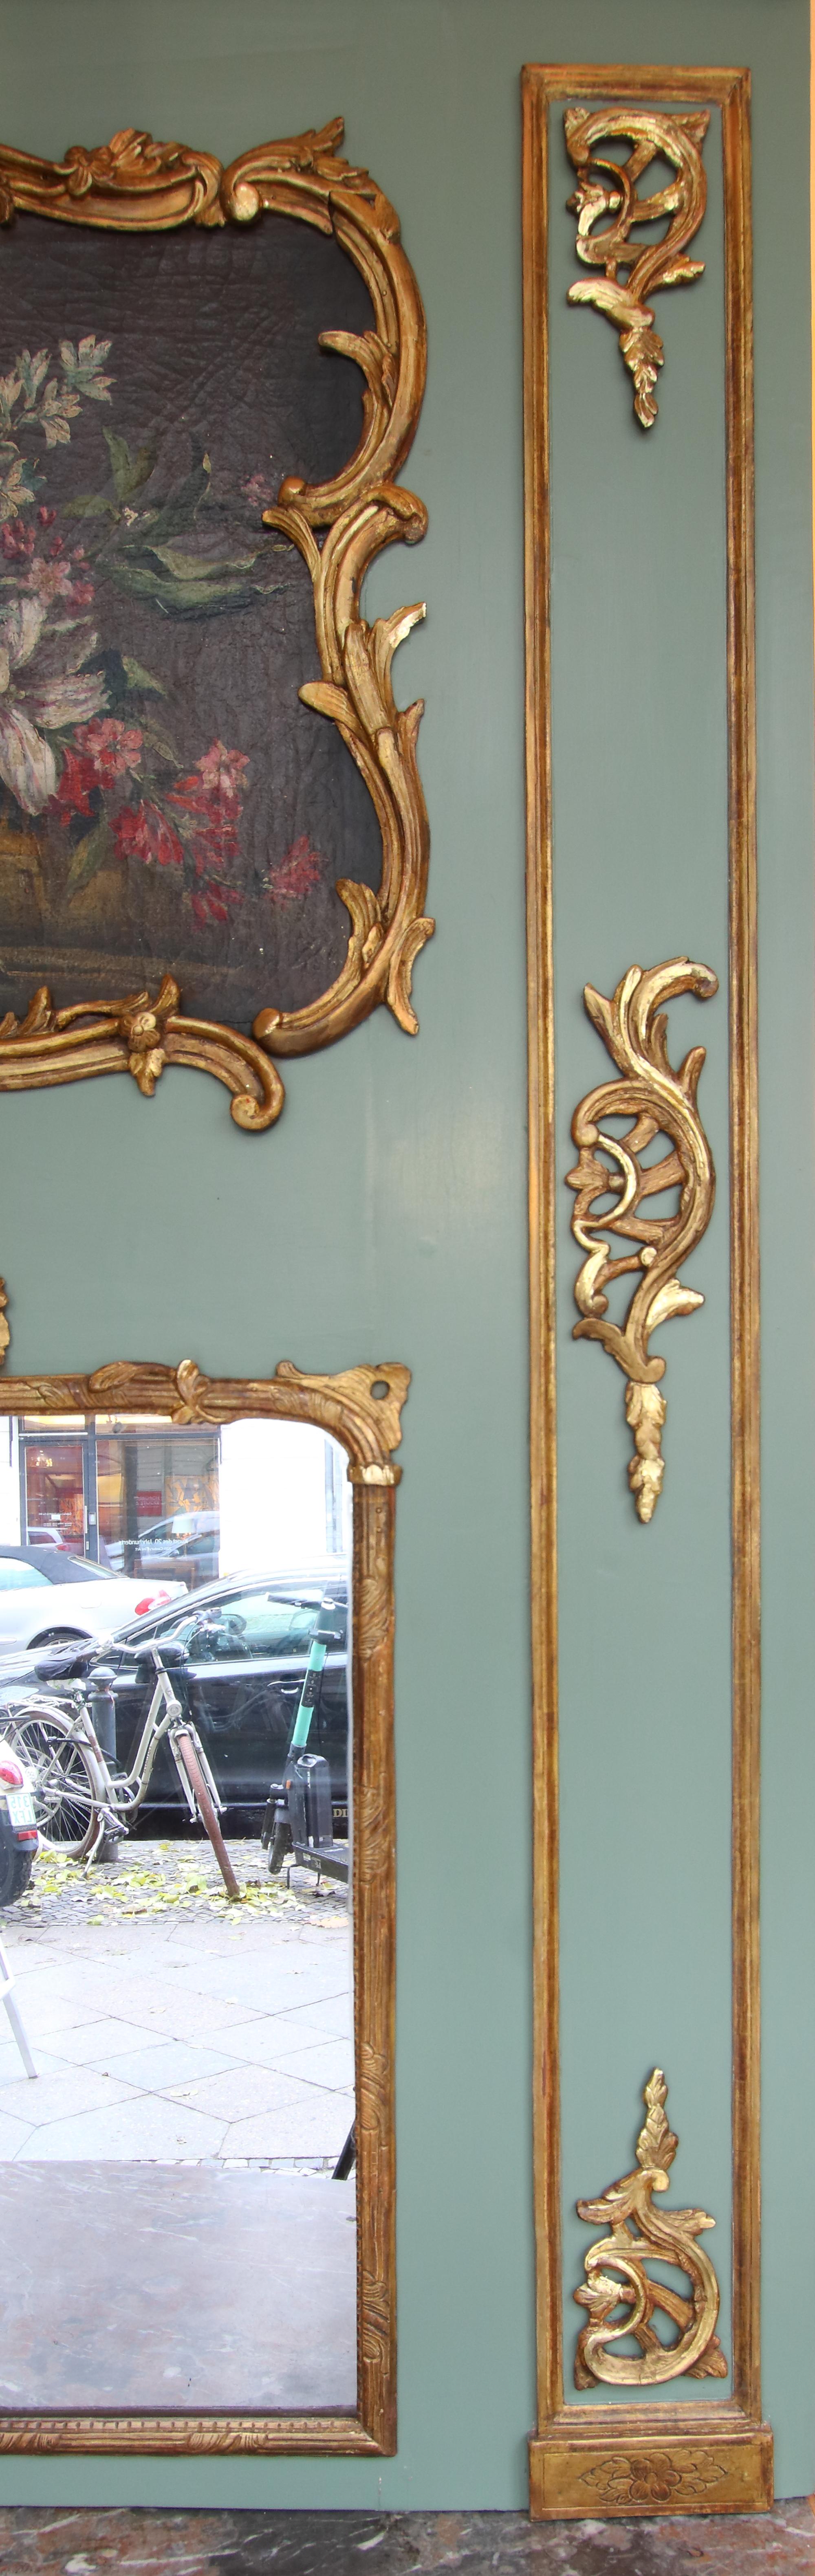 Carved 18th Century French Louis XV Period Flower Still Life Trumeau Wall Mirror For Sale